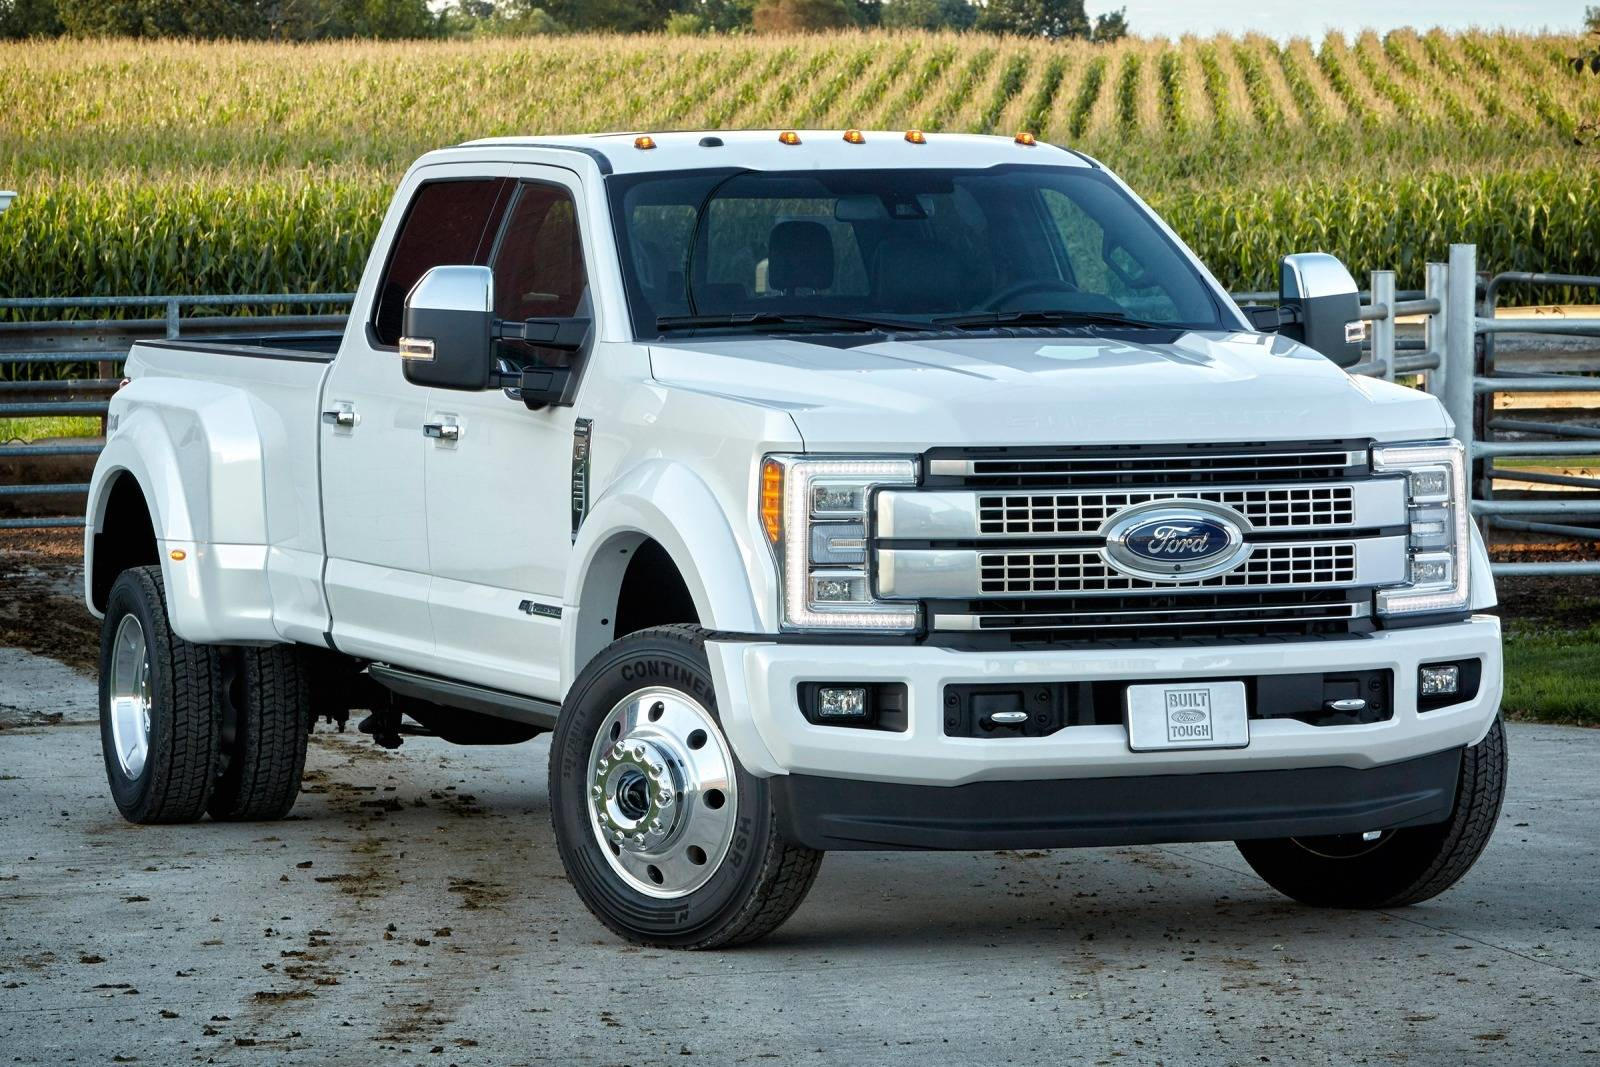 Ford F-450 Super Duty Wallpapers - PKYAH